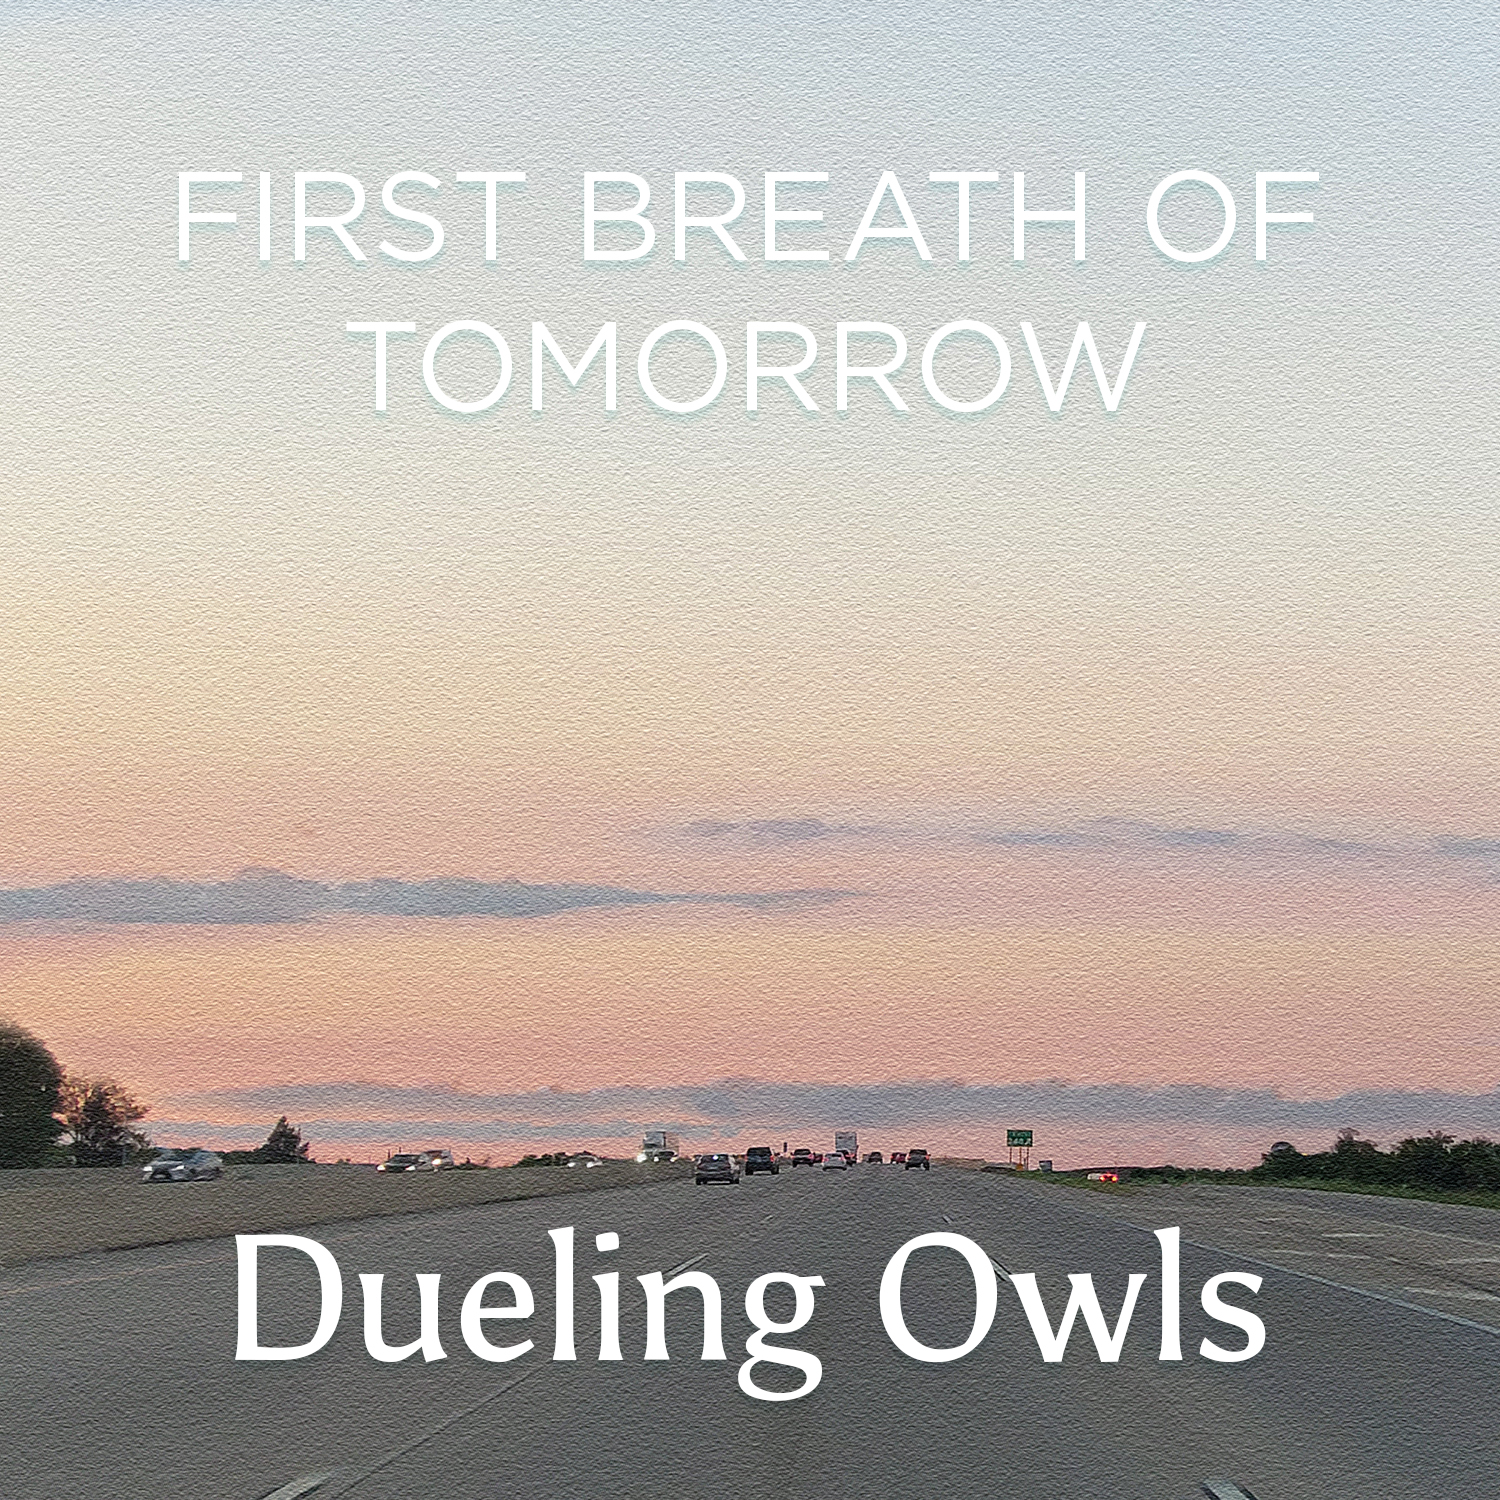 Image of sunrise over highway with the words 'First Breath of Tomorrow' and 'Dueling Owls.'